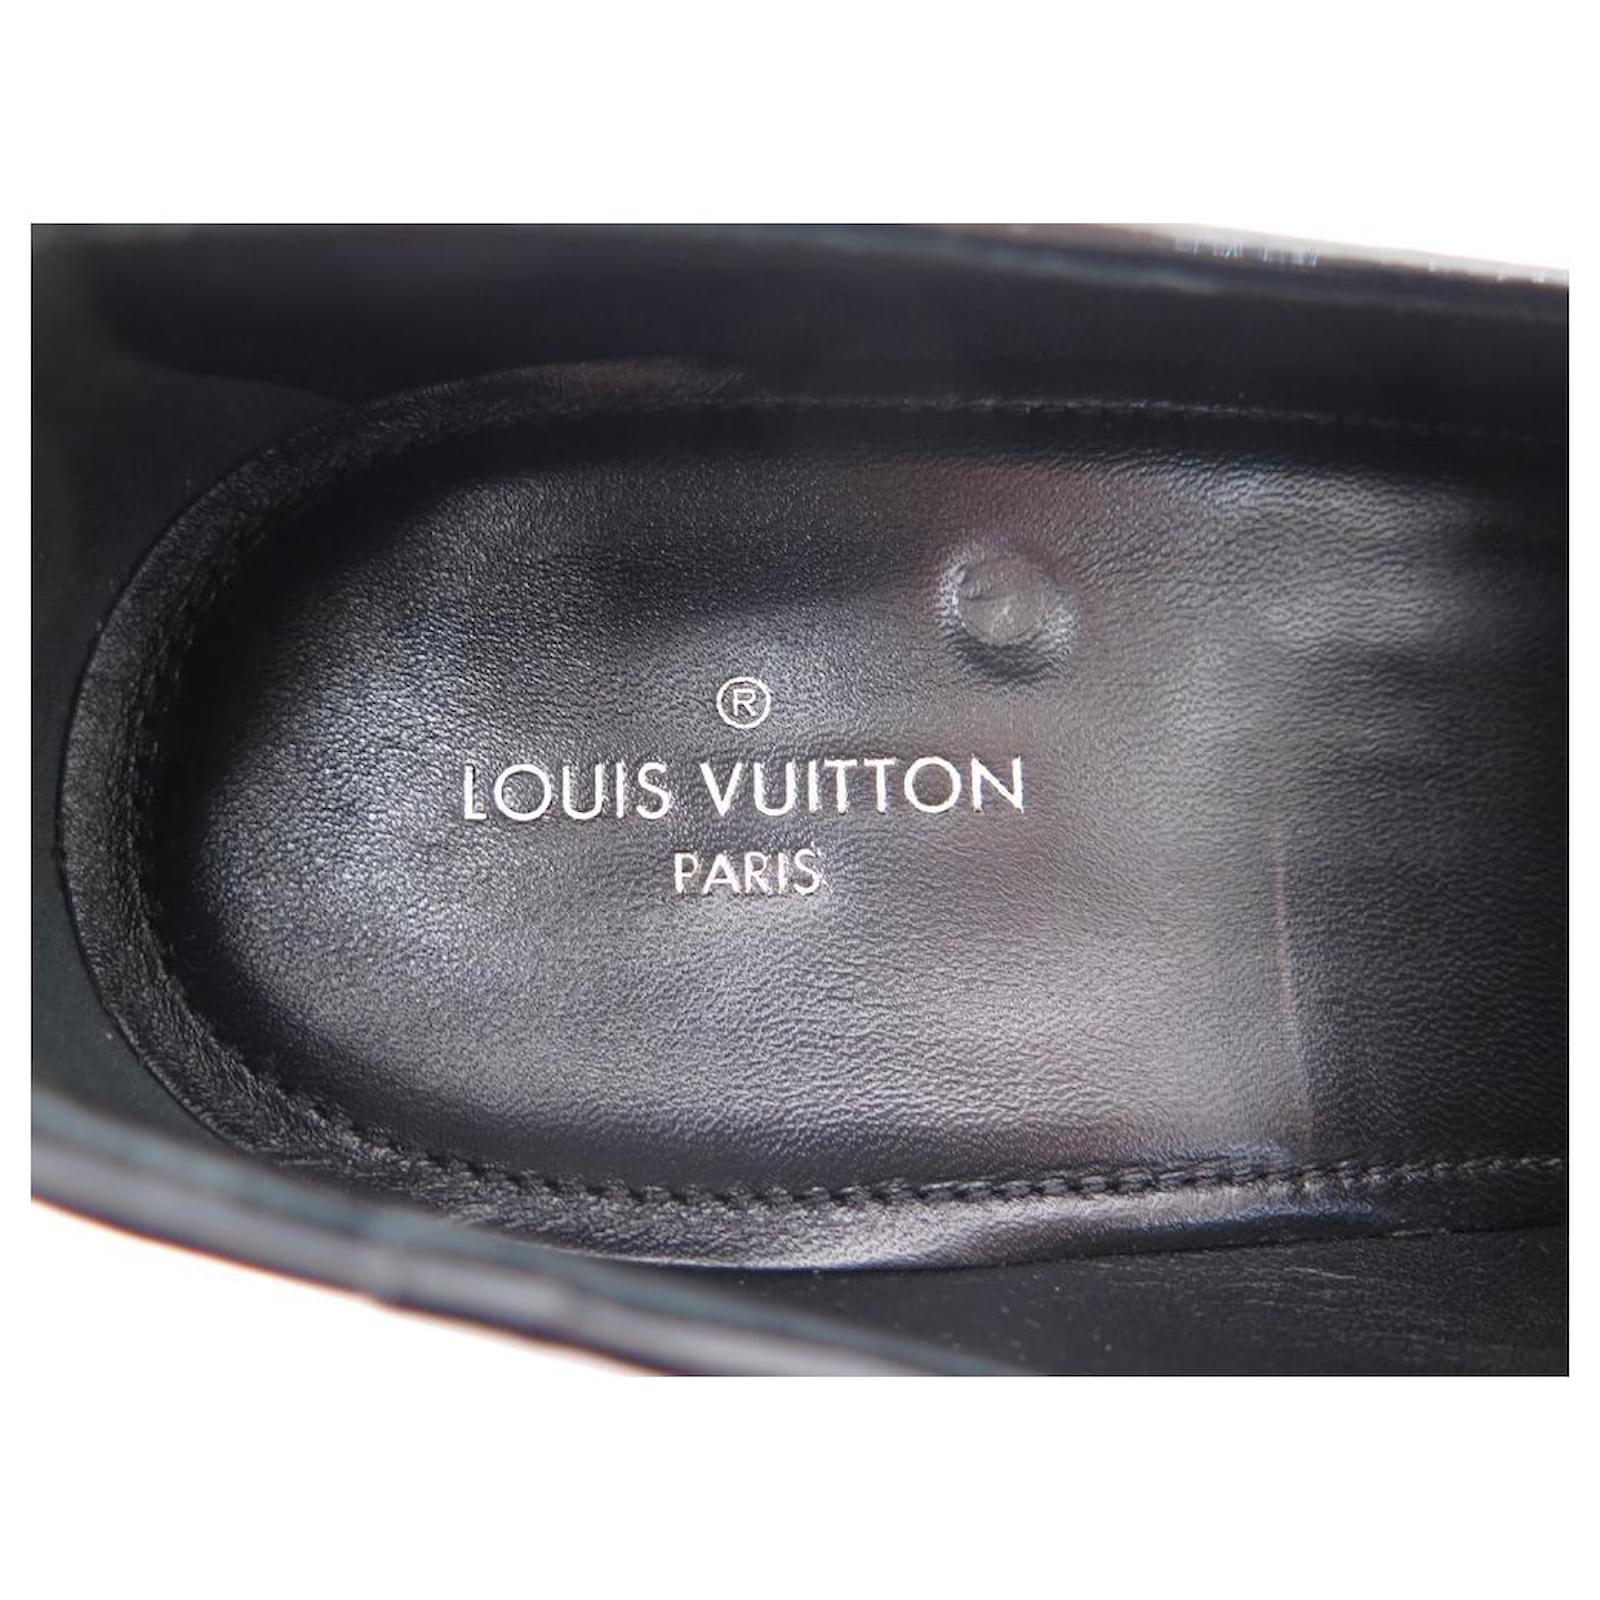 NEW LOUIS VUITTON MOCCASIN 1a7Y55 MONOGRAM PATENT LEATHER 8.5 42.5